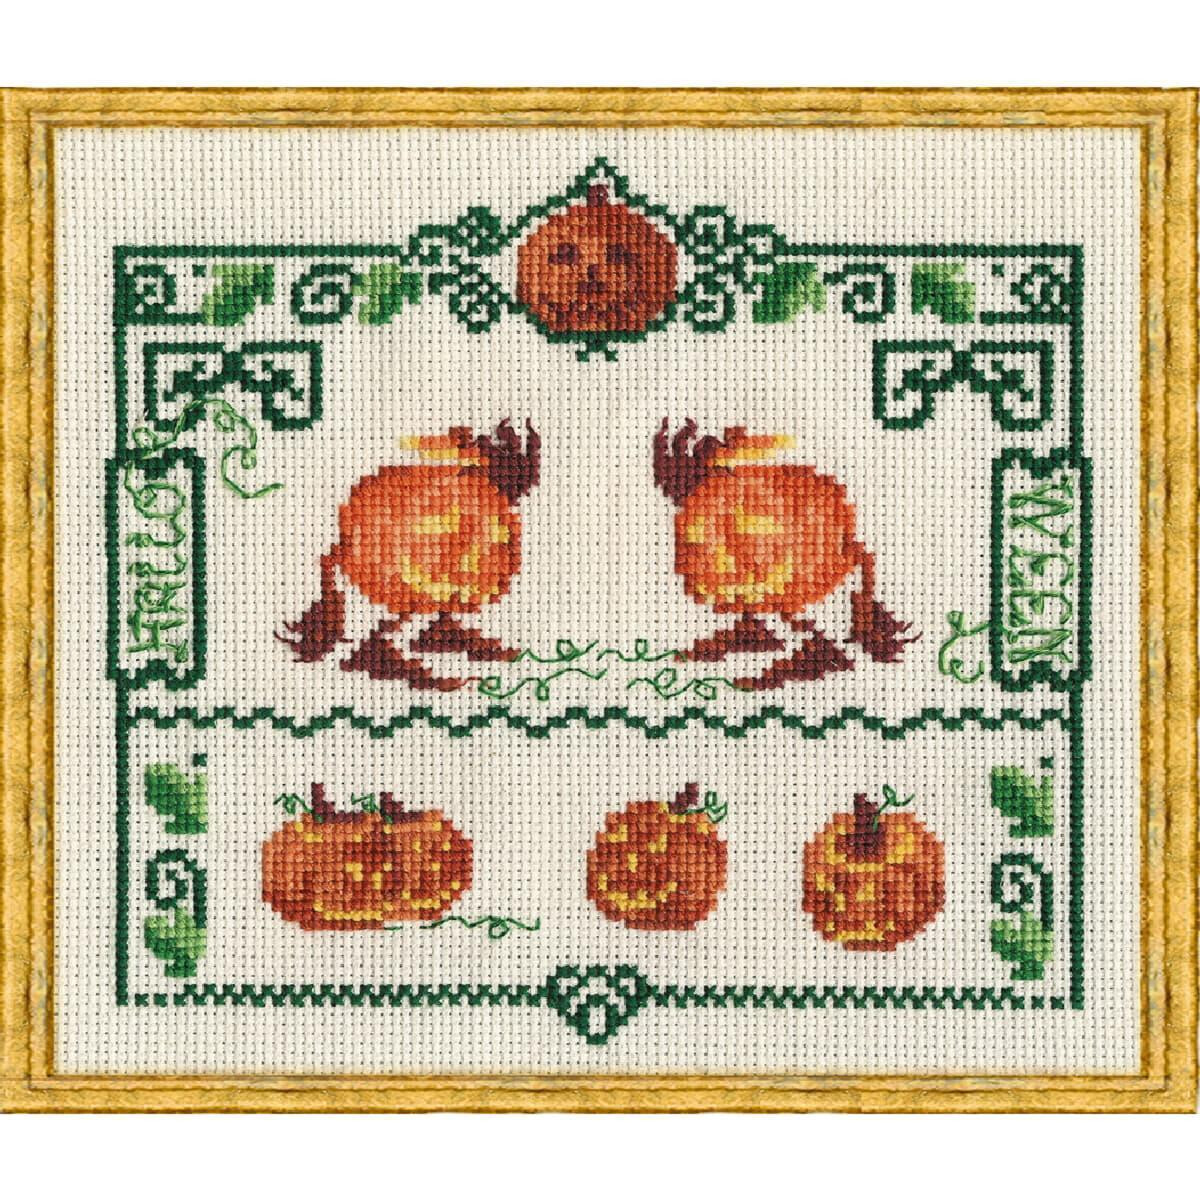 Nimue counted cross stitch kit "Halloween",...